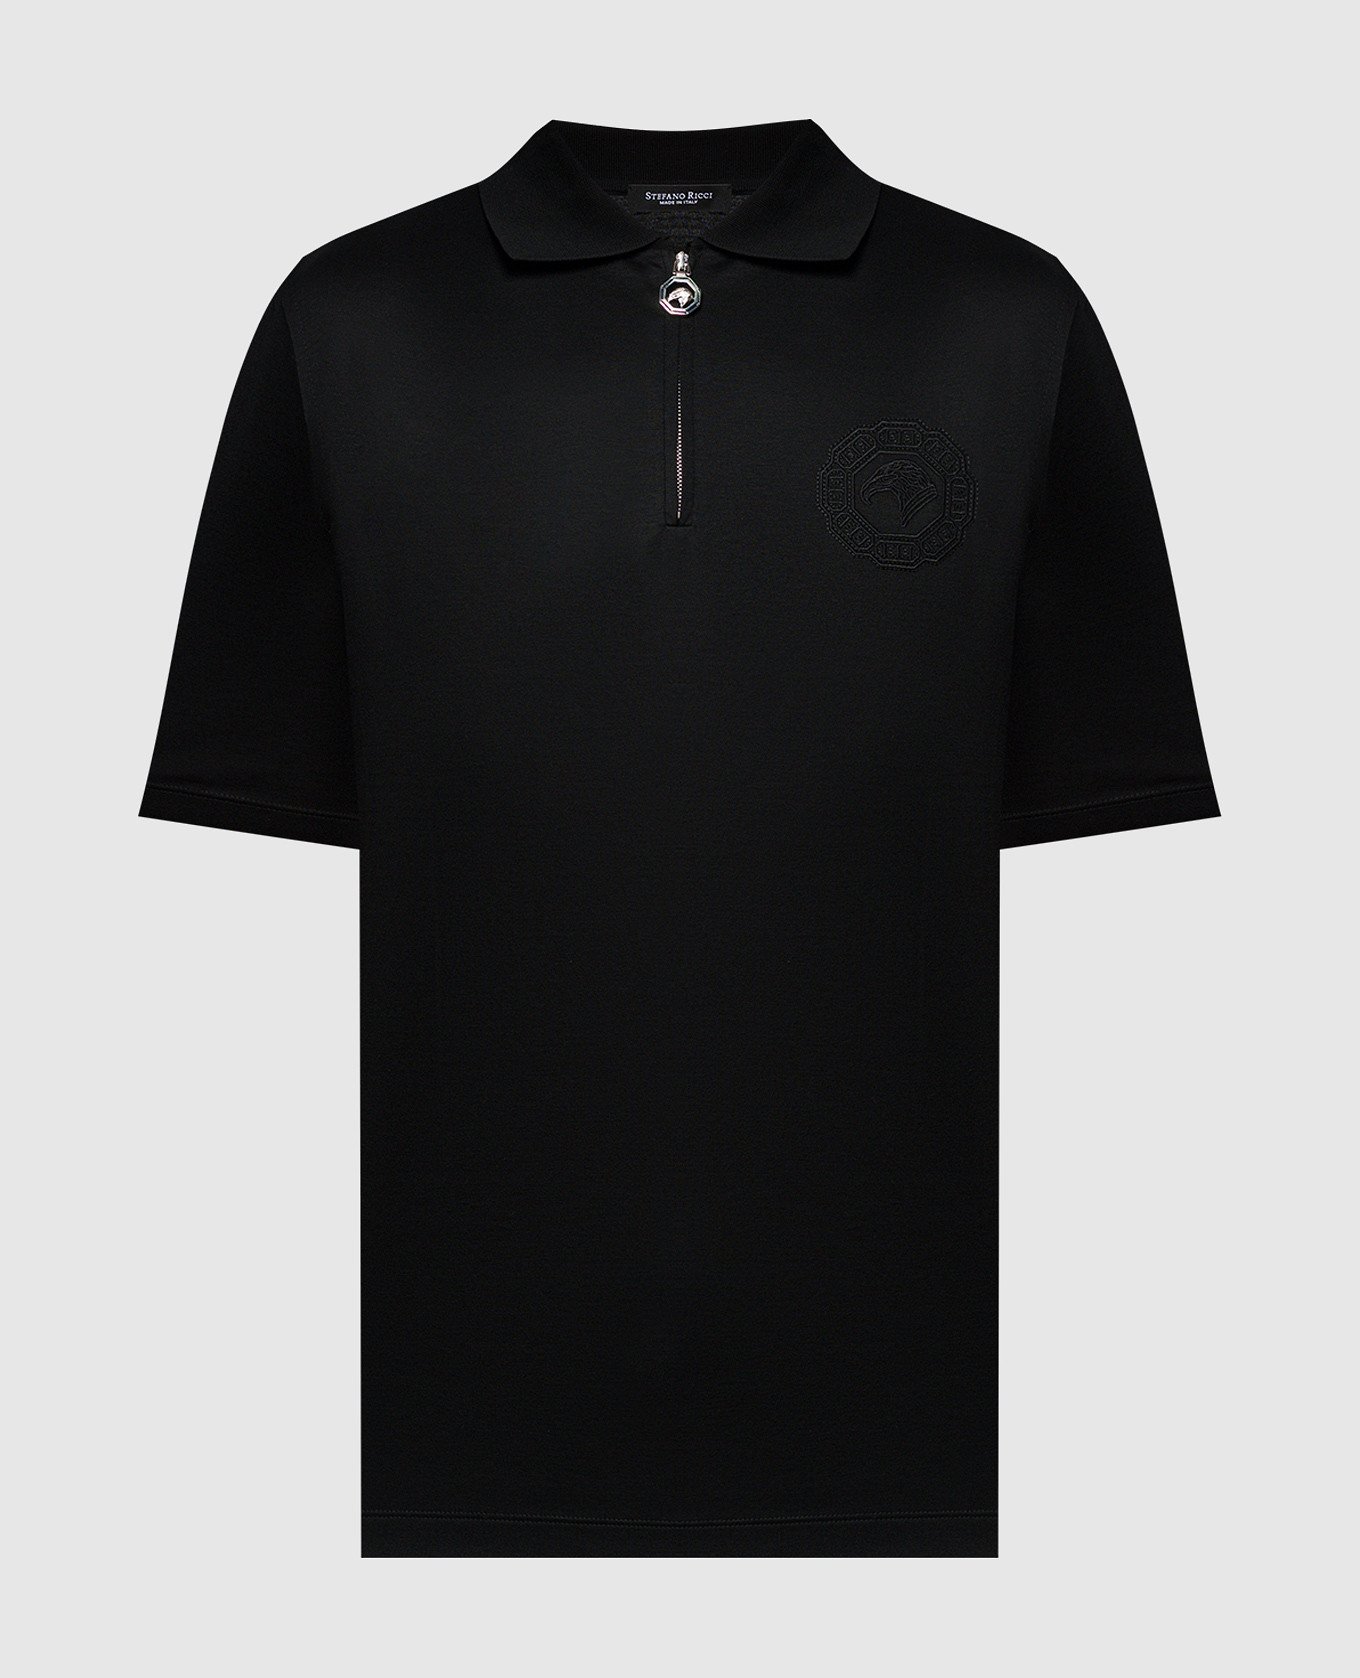 Black polo with logo emblem embroidery